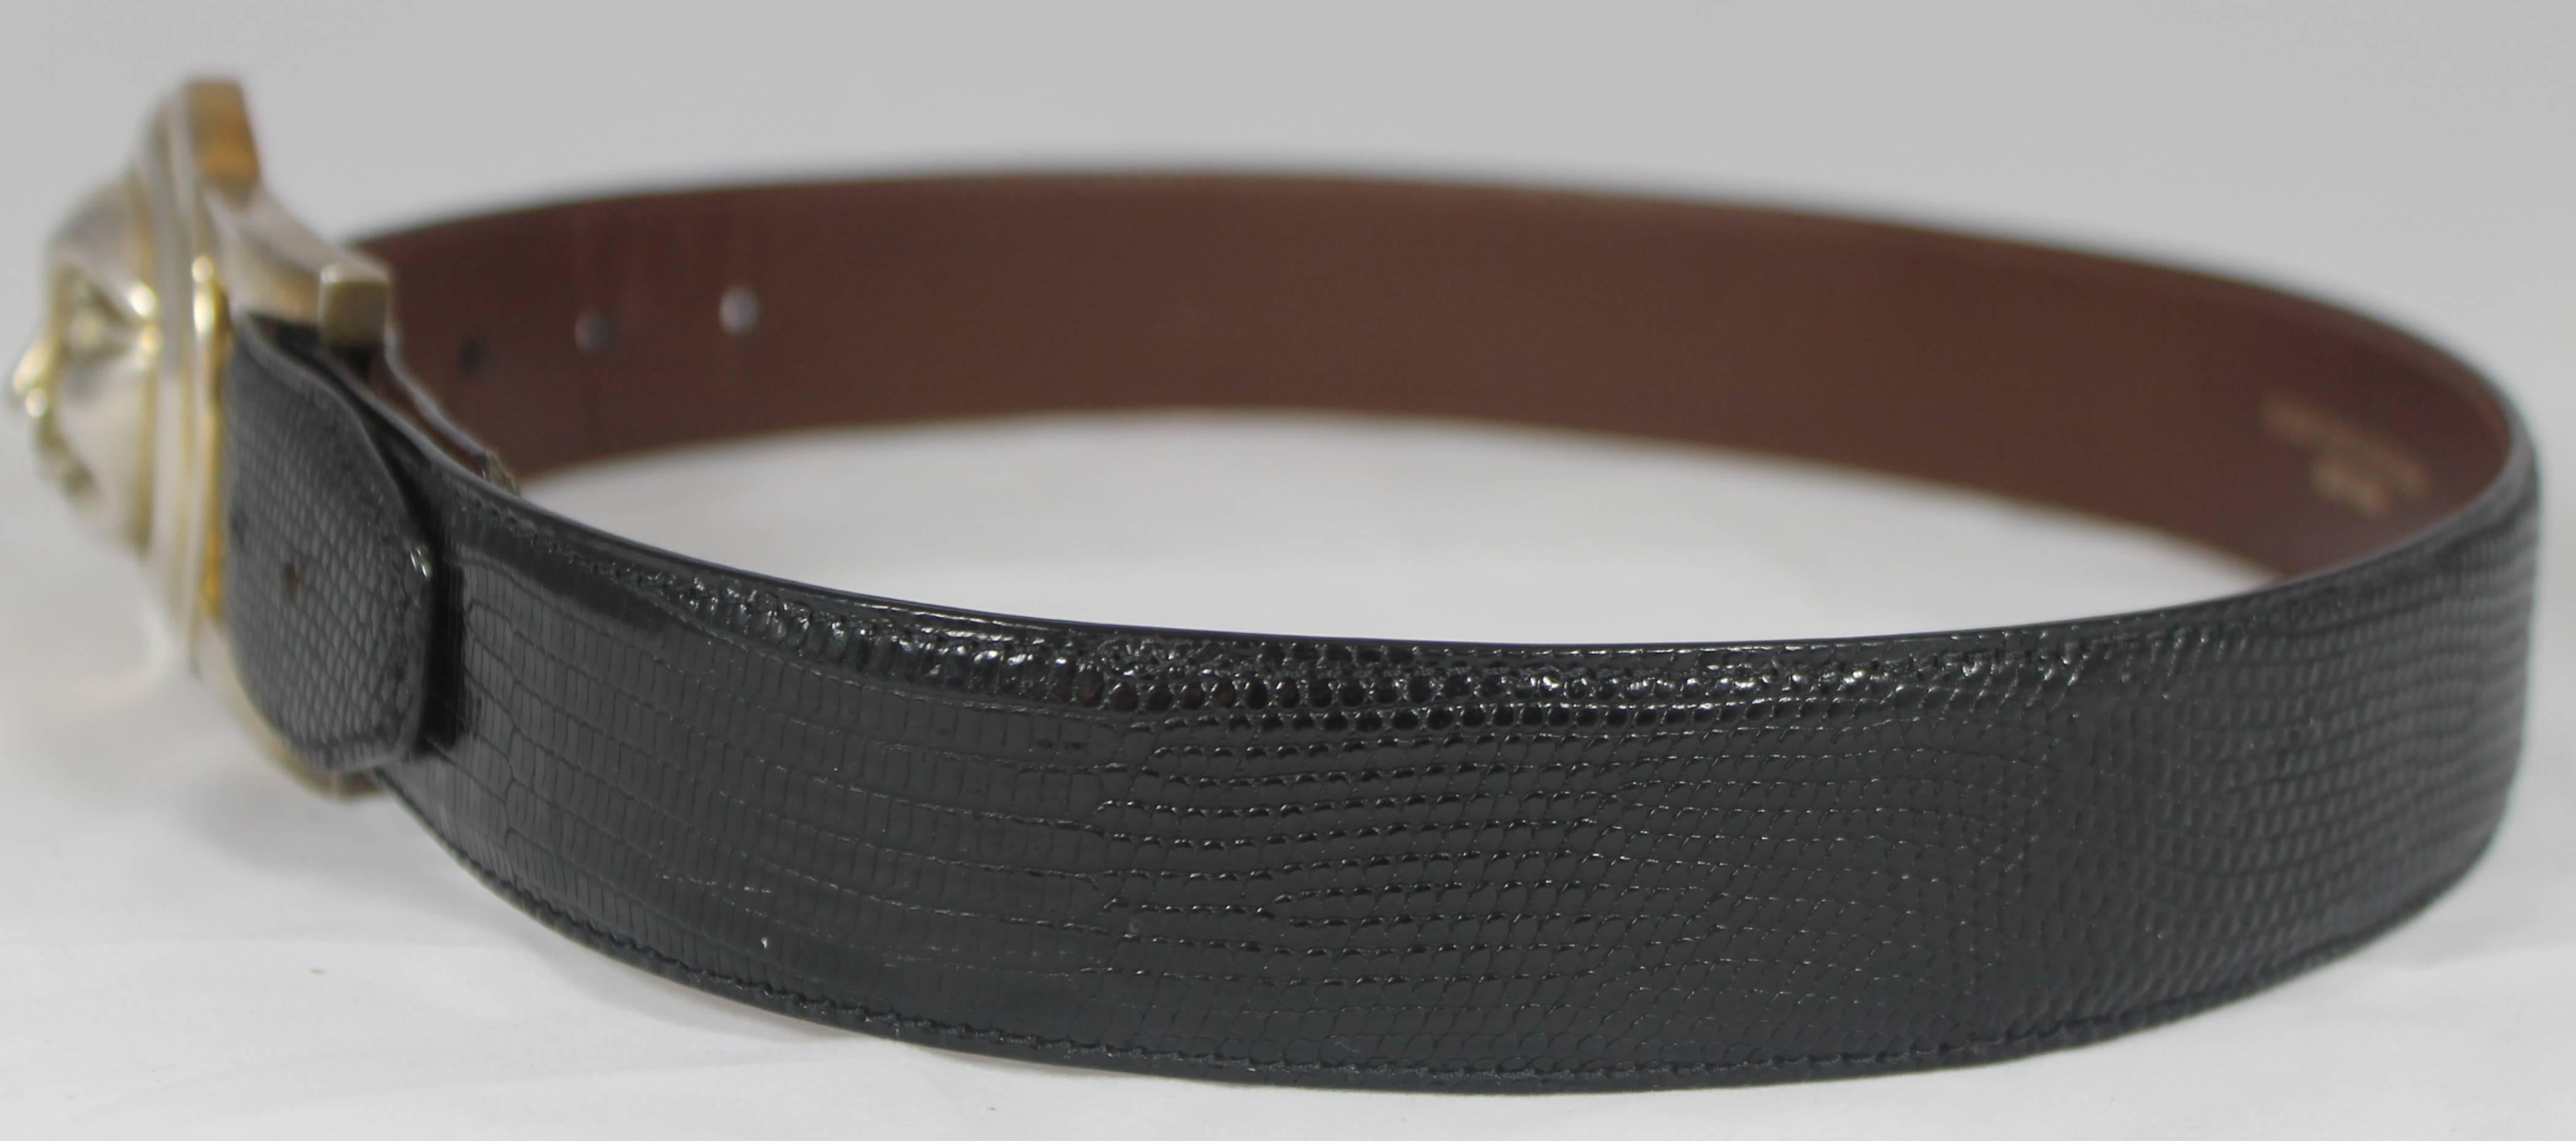 Barry Kieselstein-Cord Black Lizard Belt with Sun/Moon Buckle. This beautiful belt is genuine lizard and has a silver buckle that is half moon and half sun and has a face. This belt is in very good condition with some discoloration on the